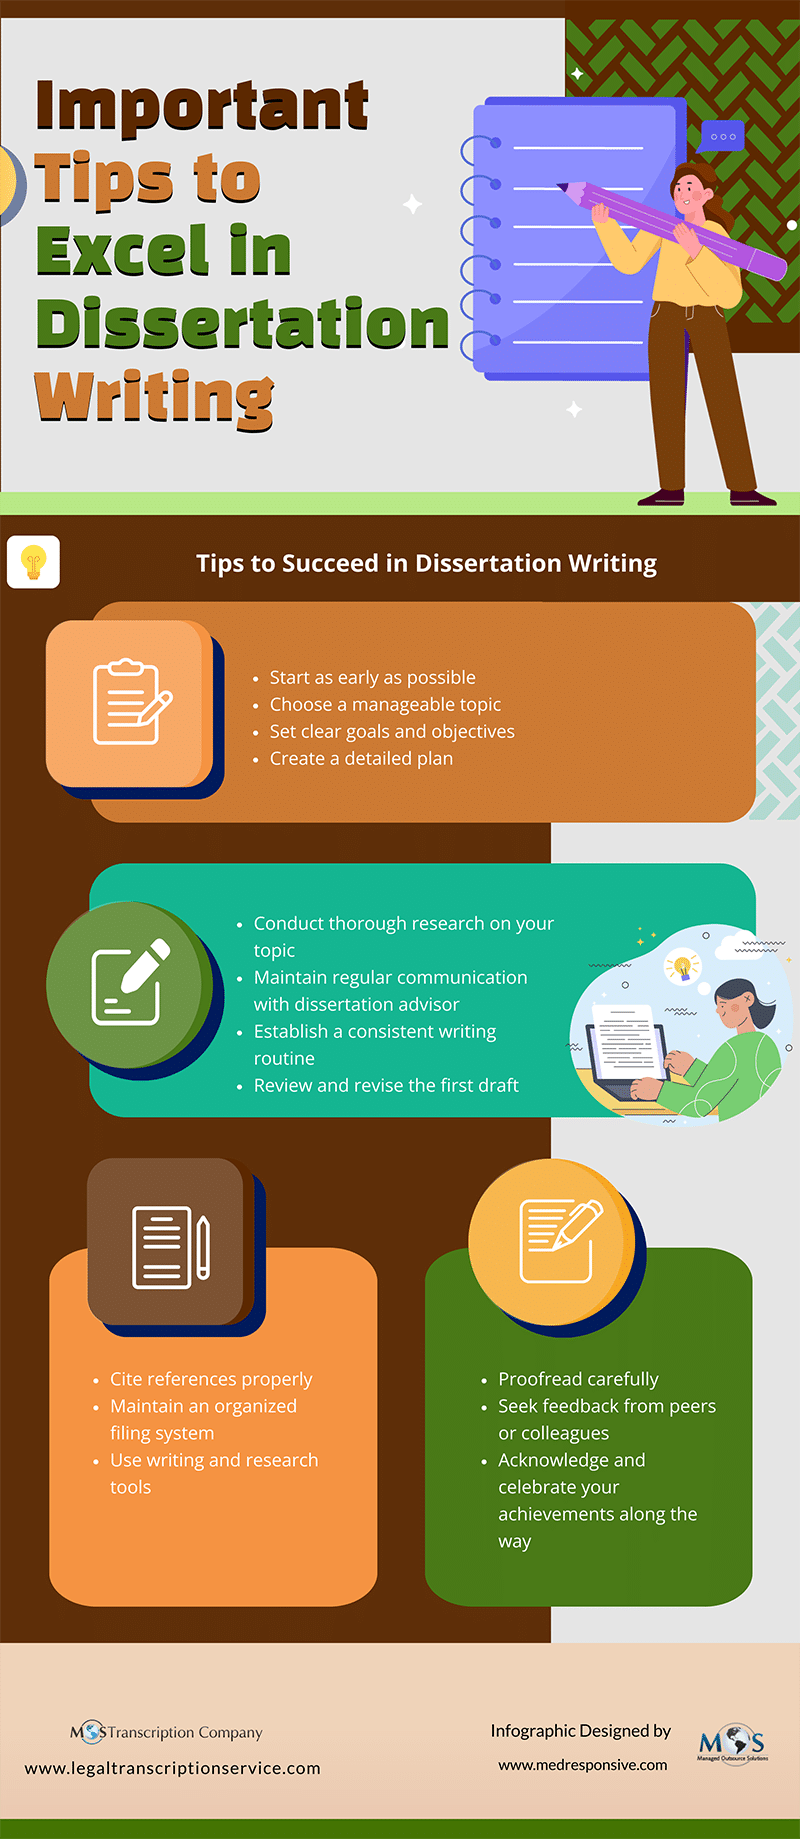 Important Tips to Excel in Dissertation Writing